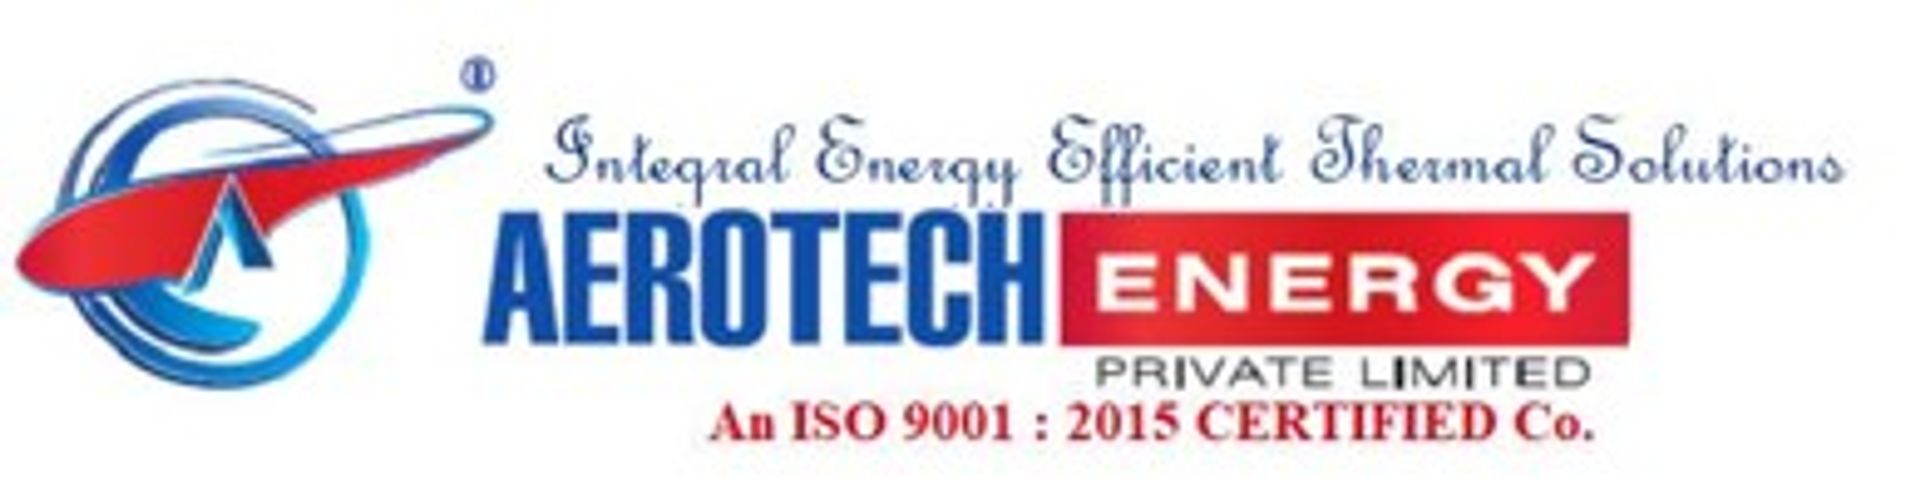 AEROTECH ENERGY PRIVATE LIMITED